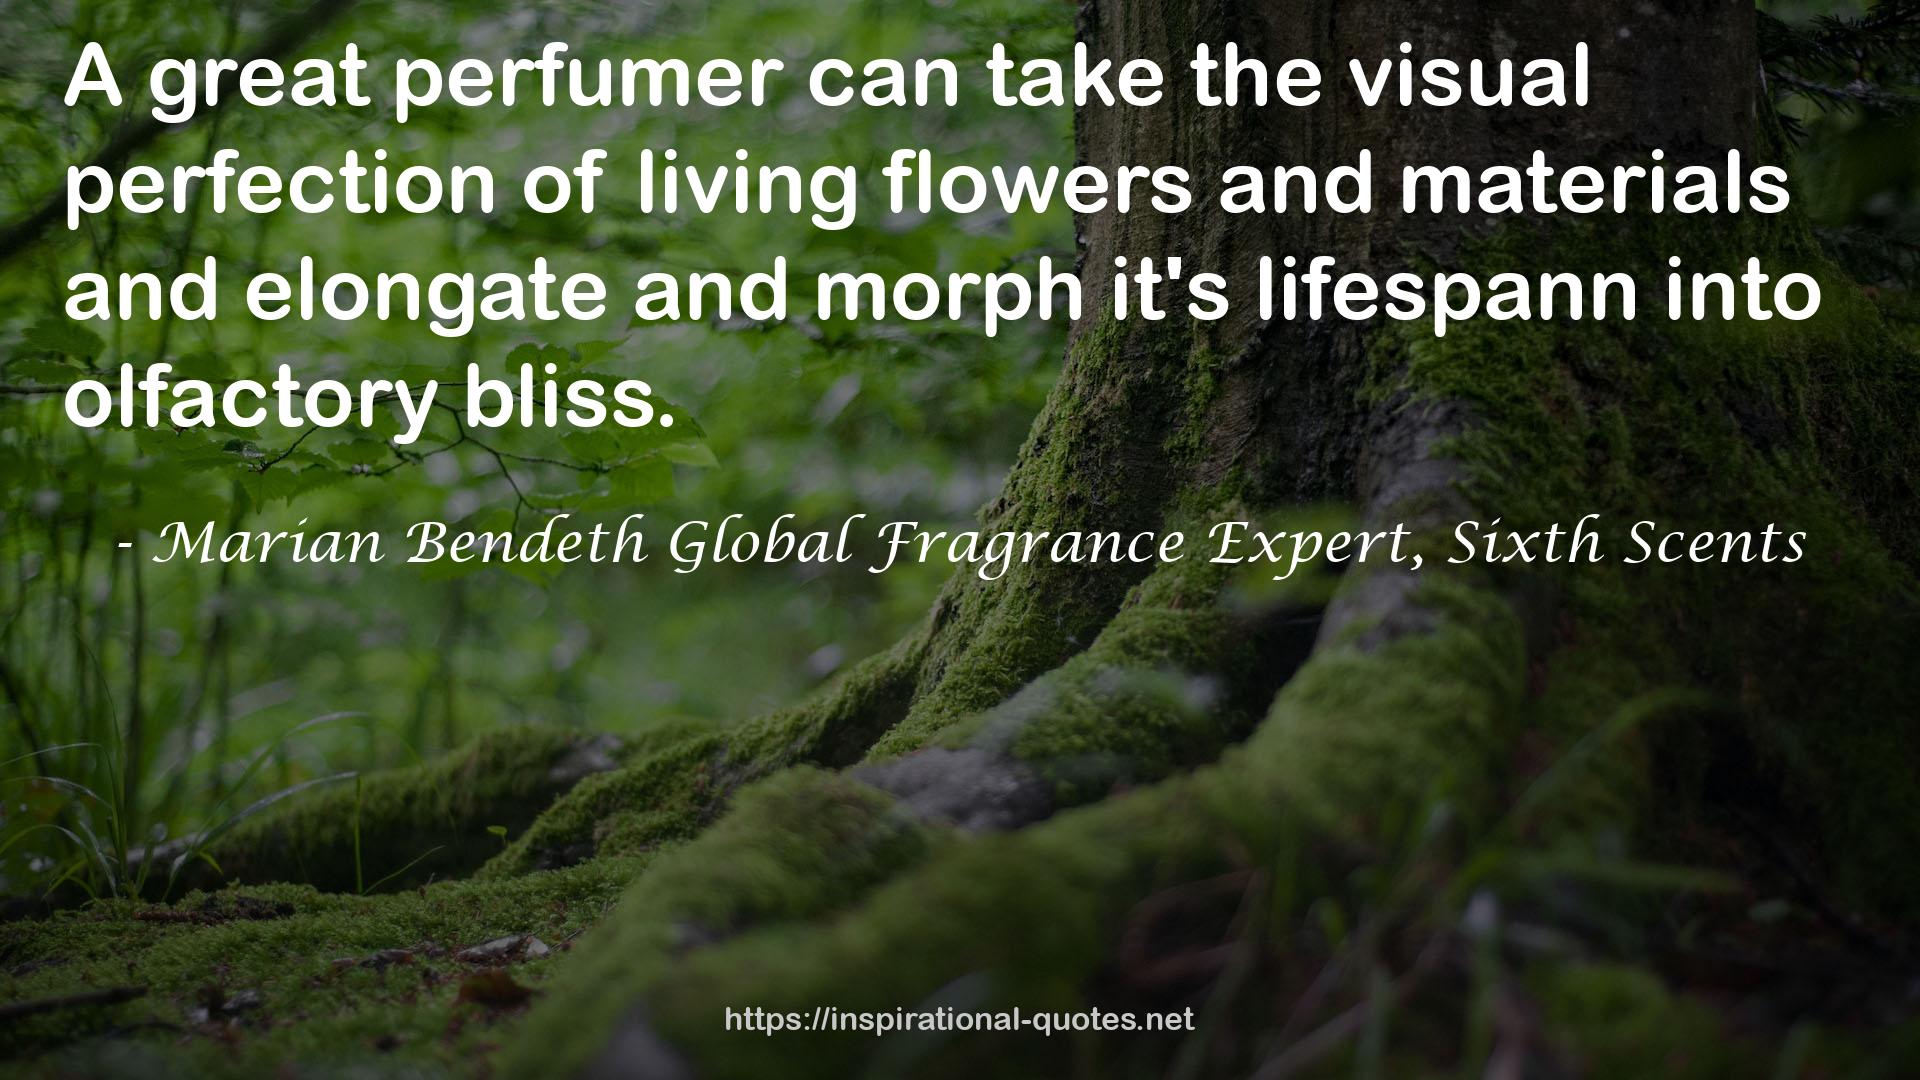 Marian Bendeth Global Fragrance Expert, Sixth Scents QUOTES